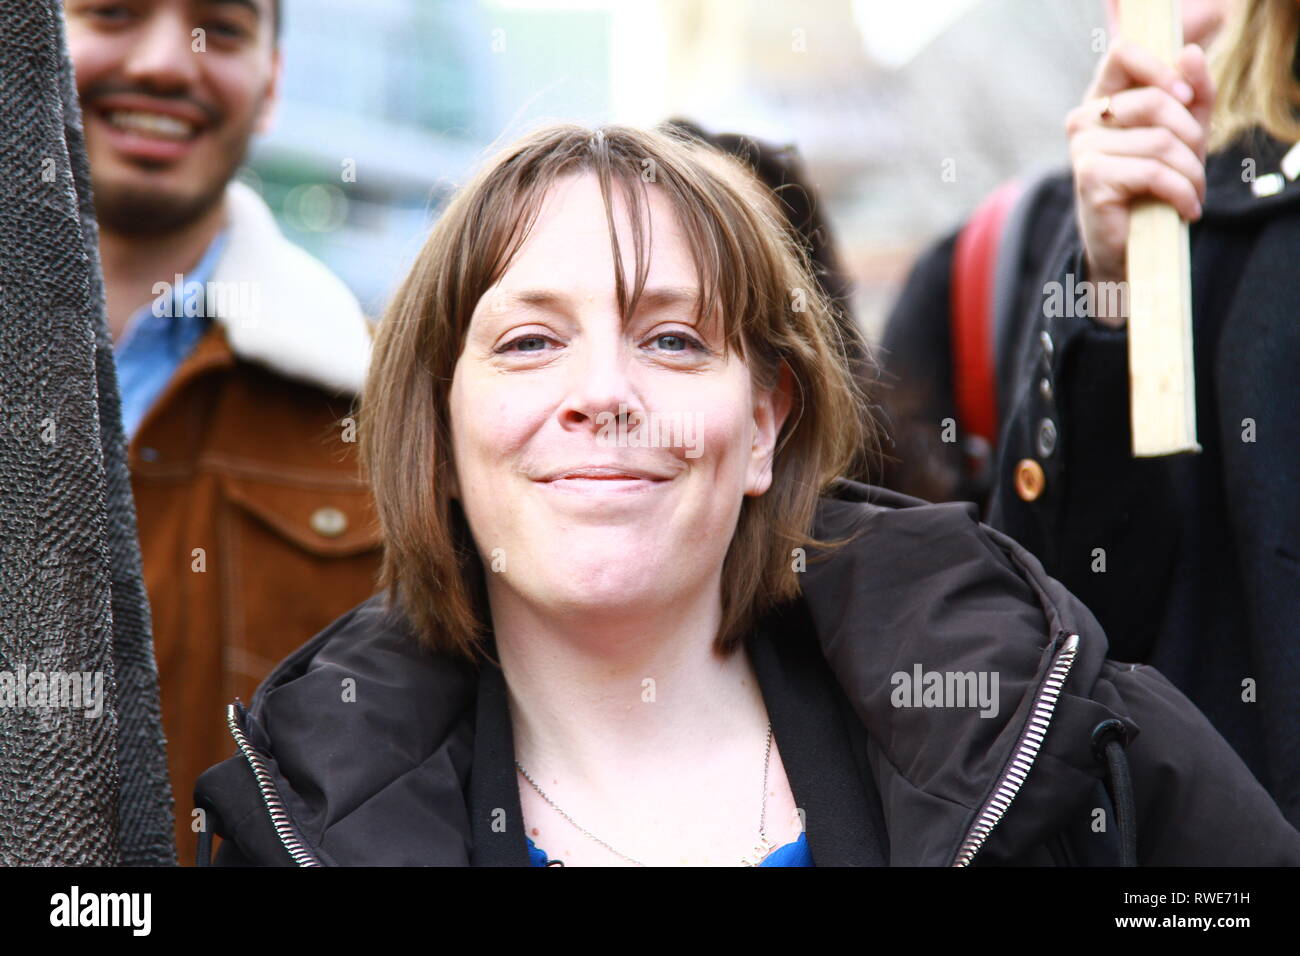 Jess Phillips member of parliament for Birmingham Yardley pictured in Parliament Square, Westminster, London, UK  whilst attending a gathering of various organisations for women's rights on 5th March 2019. Harassment in the work place. Muslim women's network UK. Labour party MPS. British politicians. UK Politics. UK politicians. Russell Moore portfolio page. Stock Photo